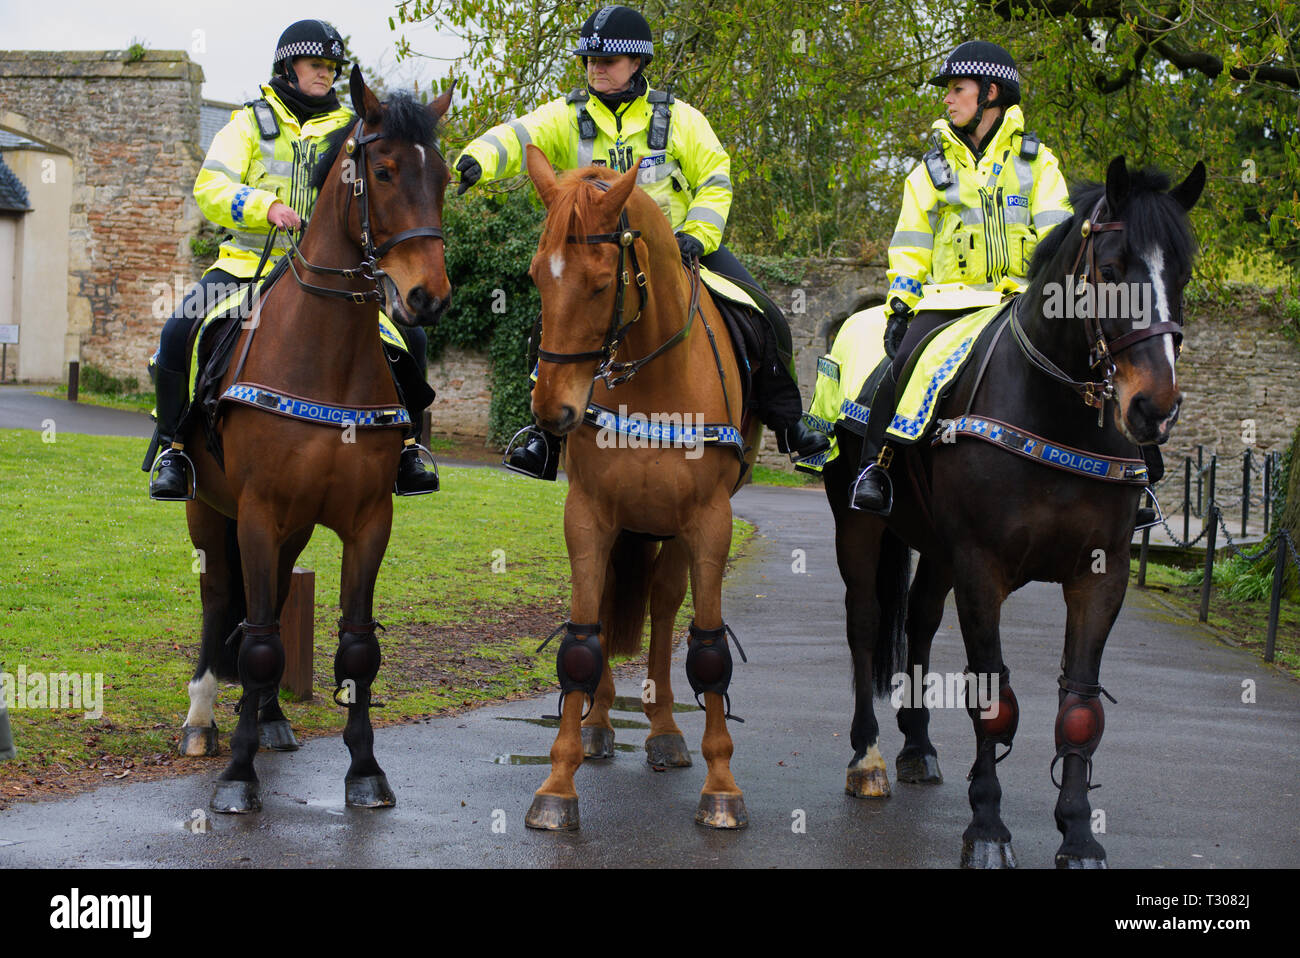 Mounted Police Officers preparing for a photography session at the Bishop's Palace in Wells, Somerset, UK Stock Photo